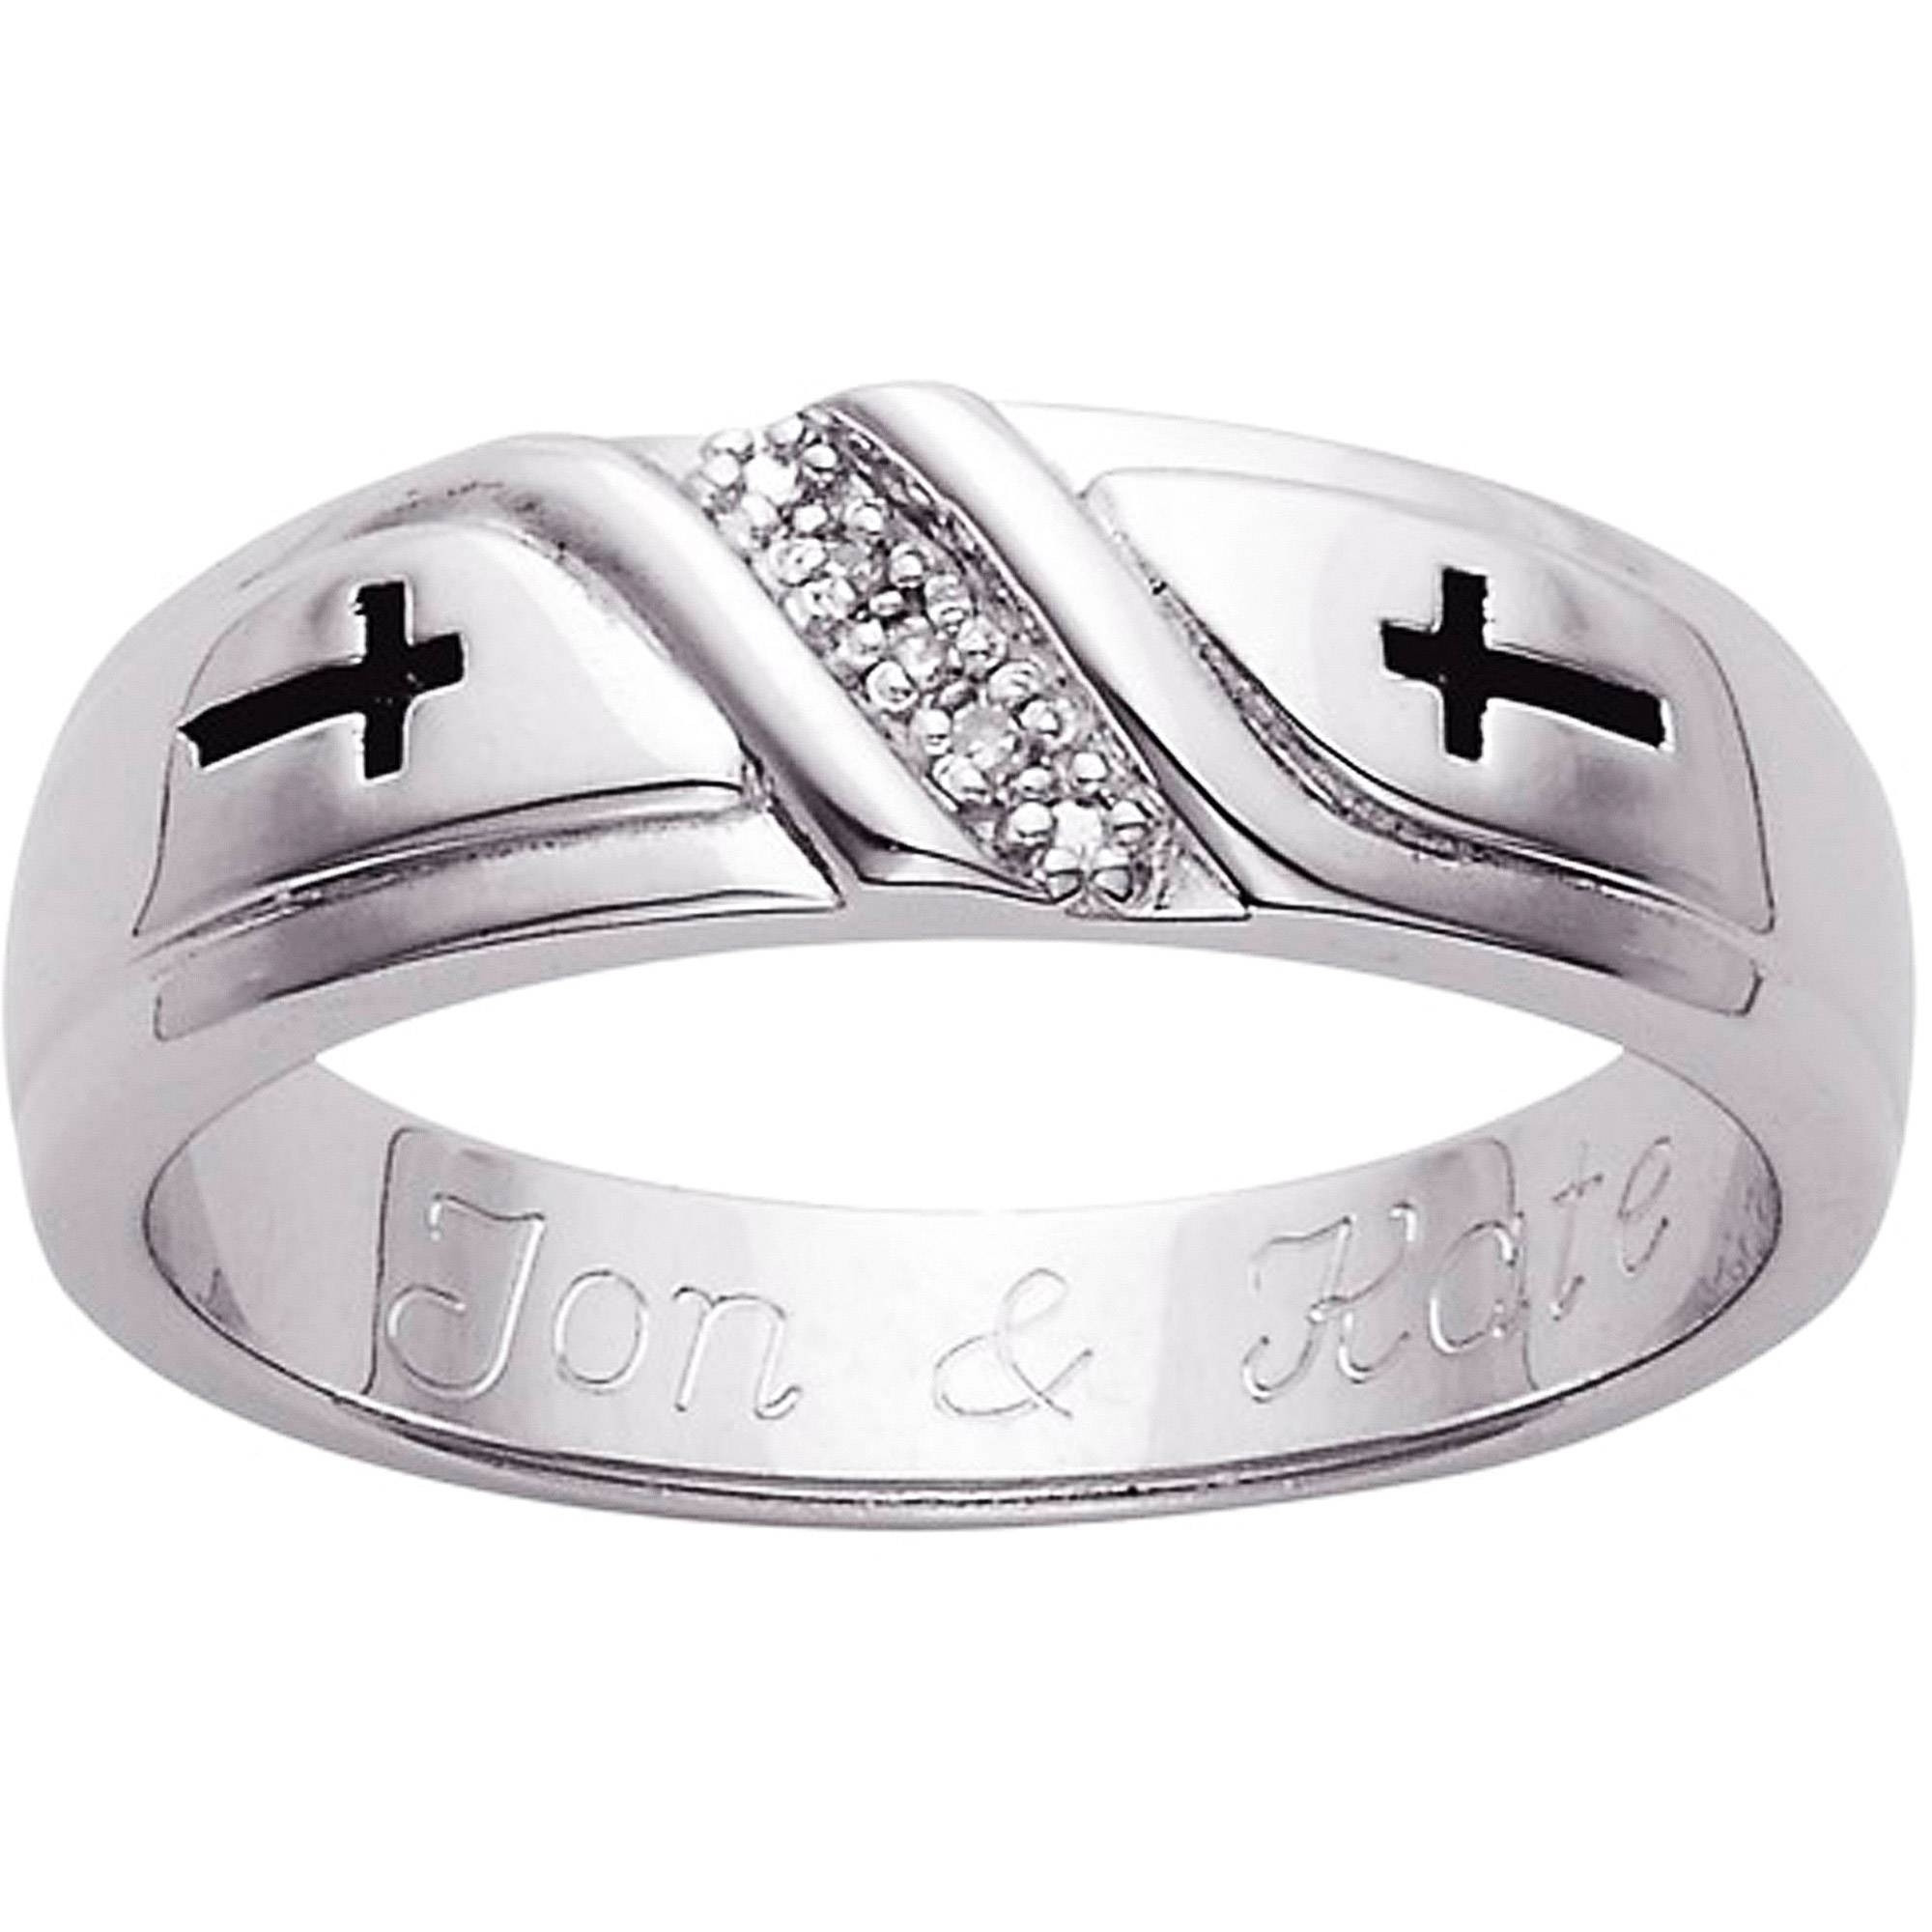 Mens Cross Wedding Bands
 15 Collection of Mens Wedding Bands With Cross